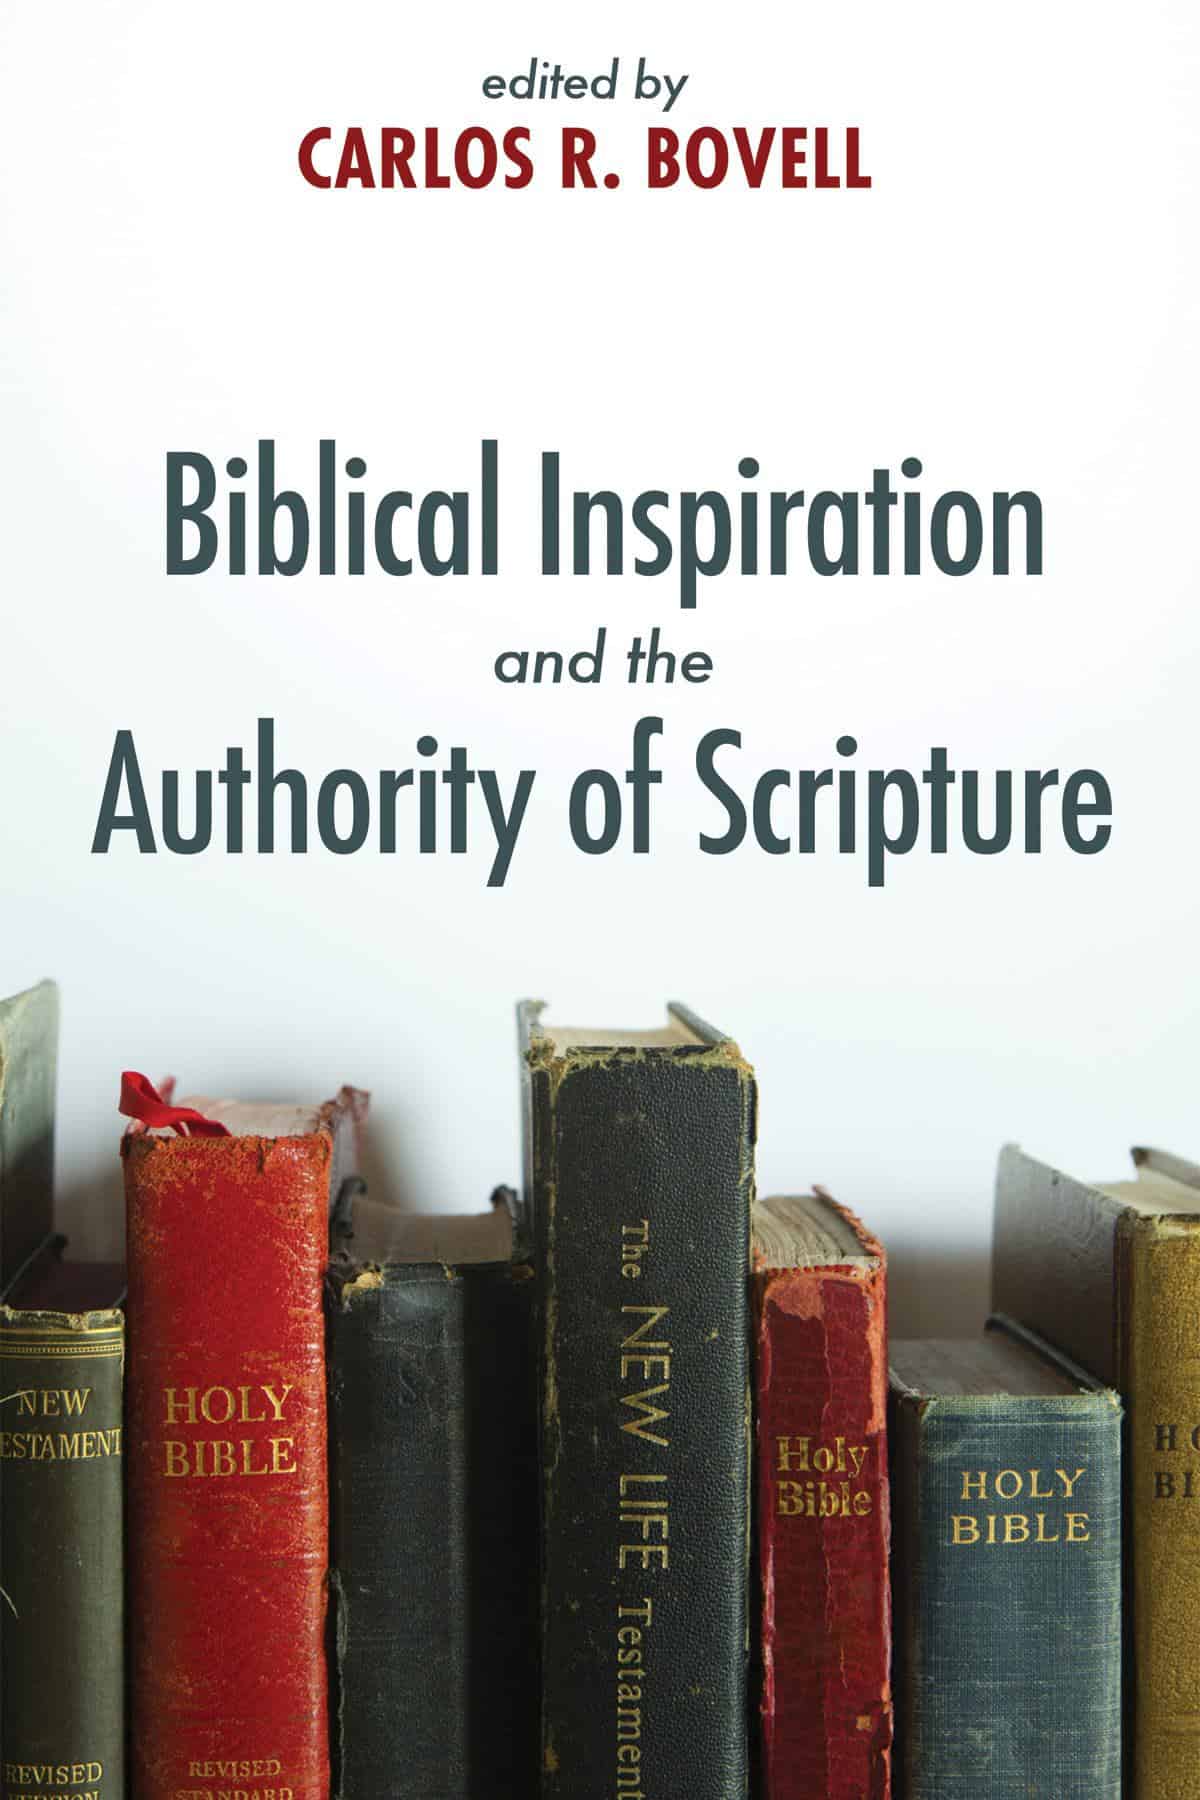 thinking differently about the inspiration and authority of the Bible